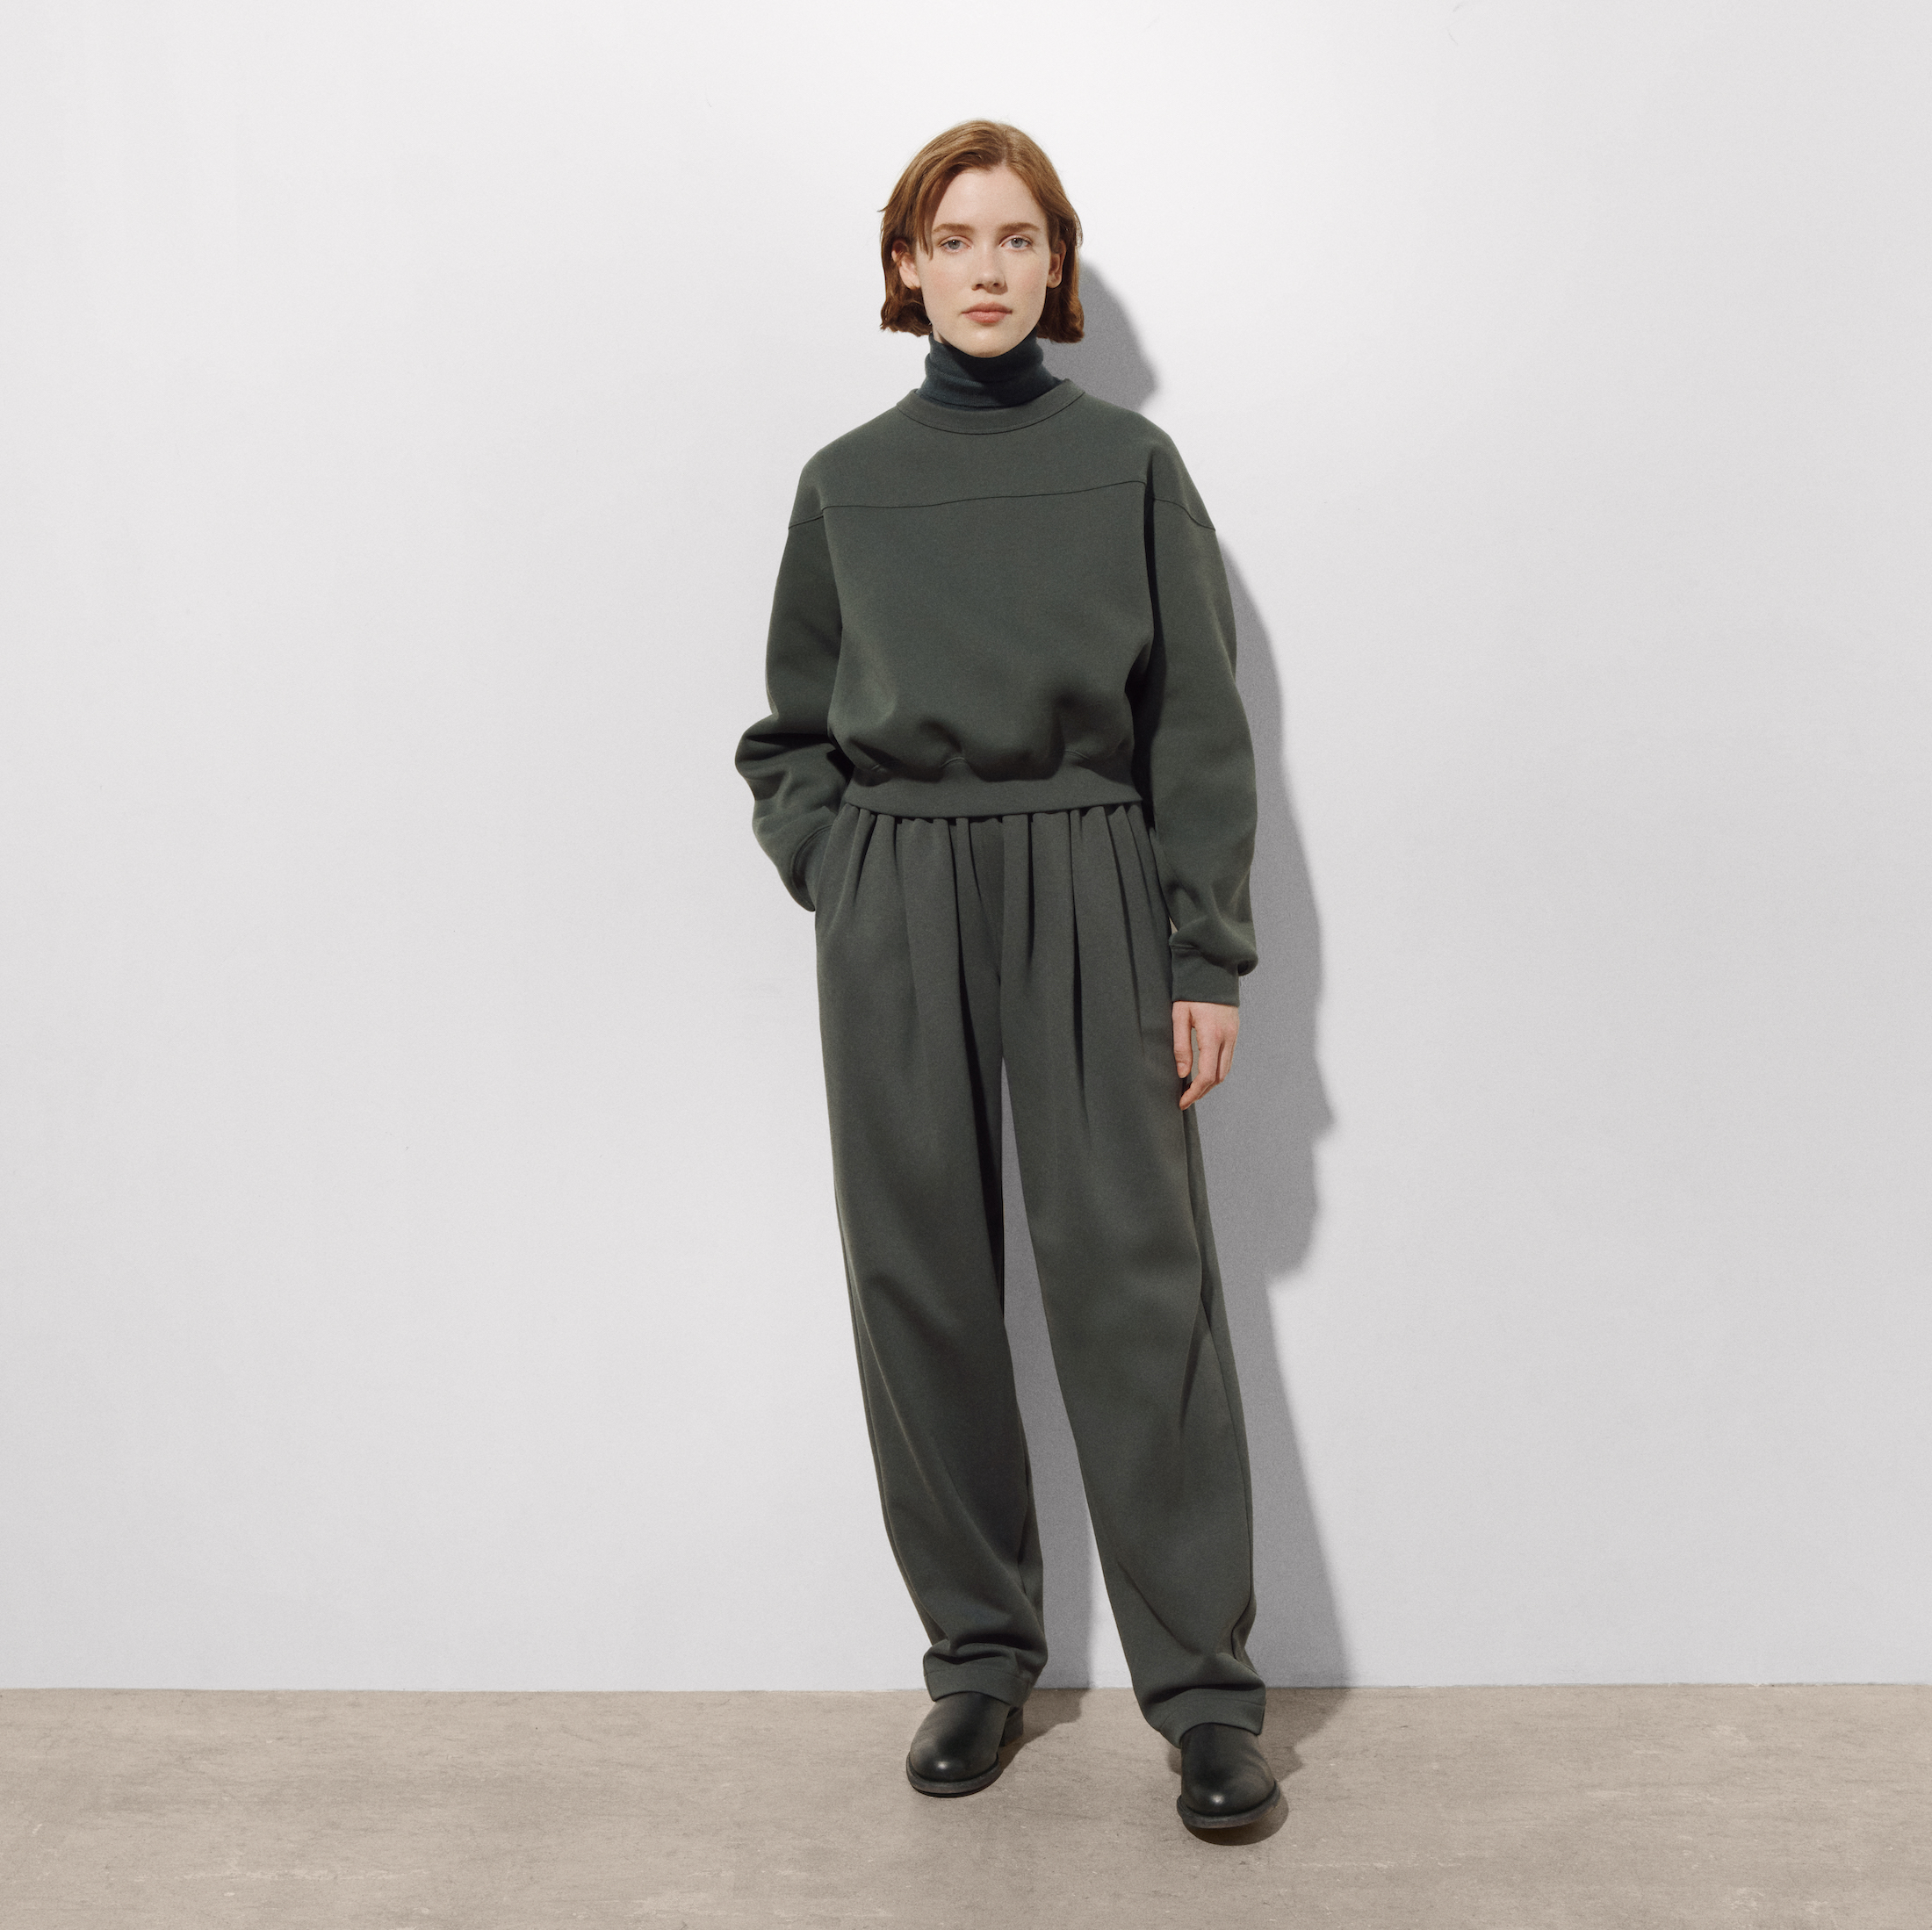 Take A Look At Uniqlo U's Sleek And Chic Wear For Fall/Winter 2021